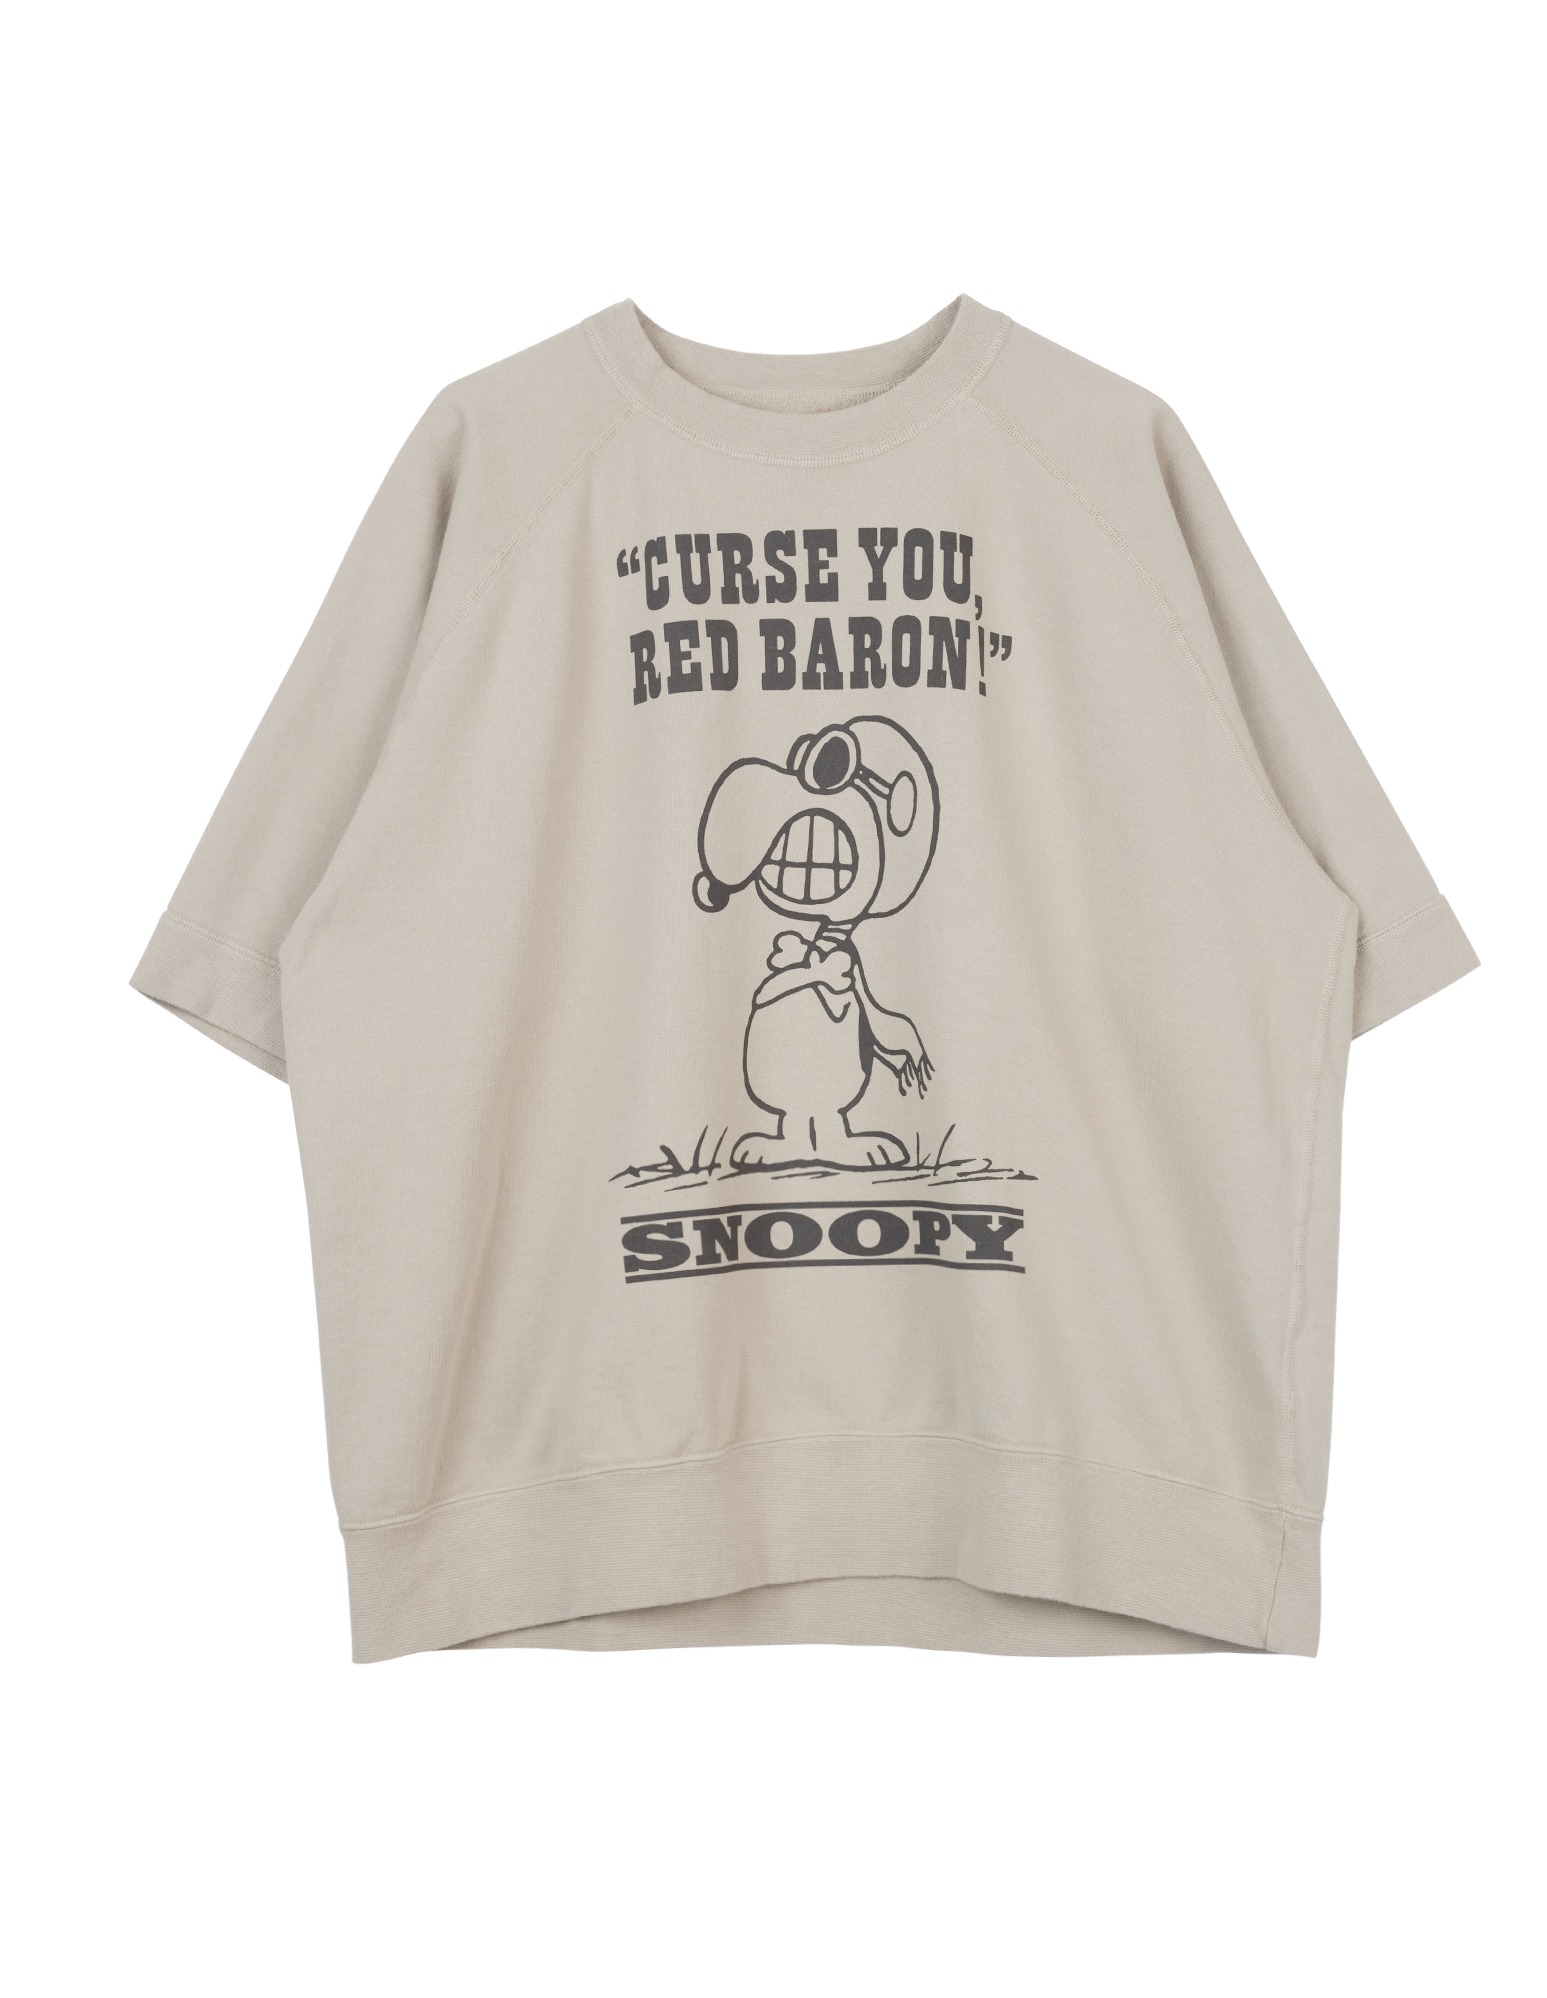 TMC2420 SHORT SLEEVE SWEAT SHIRT SNOOPY &quot;CURSE YOU, RED BARON!&quot; (Sand)